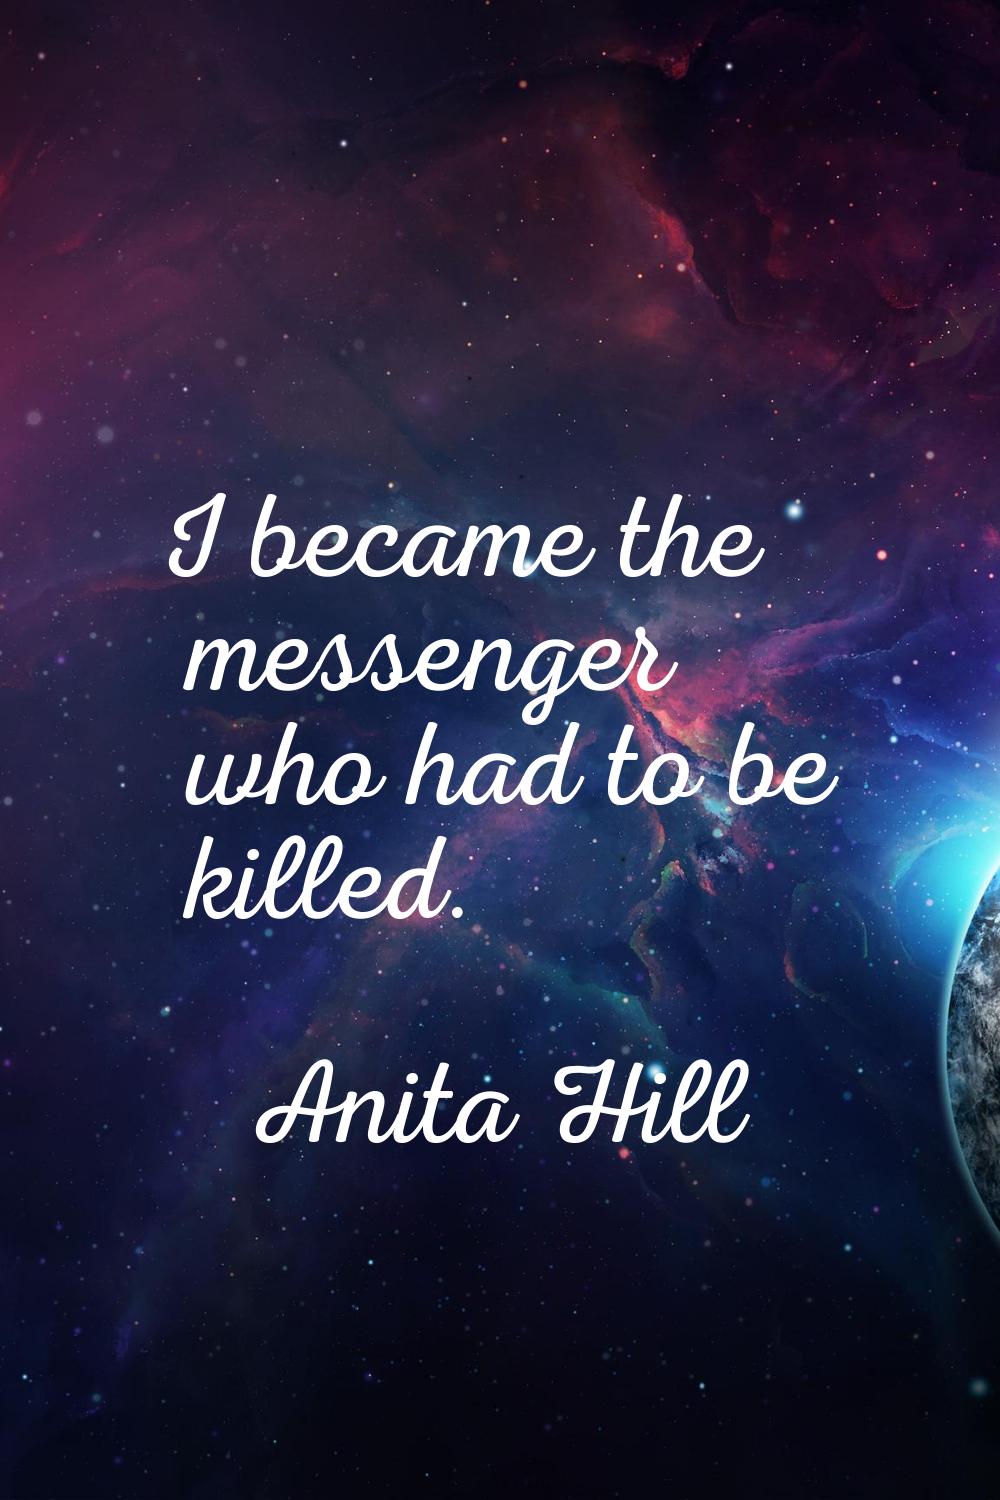 I became the messenger who had to be killed.